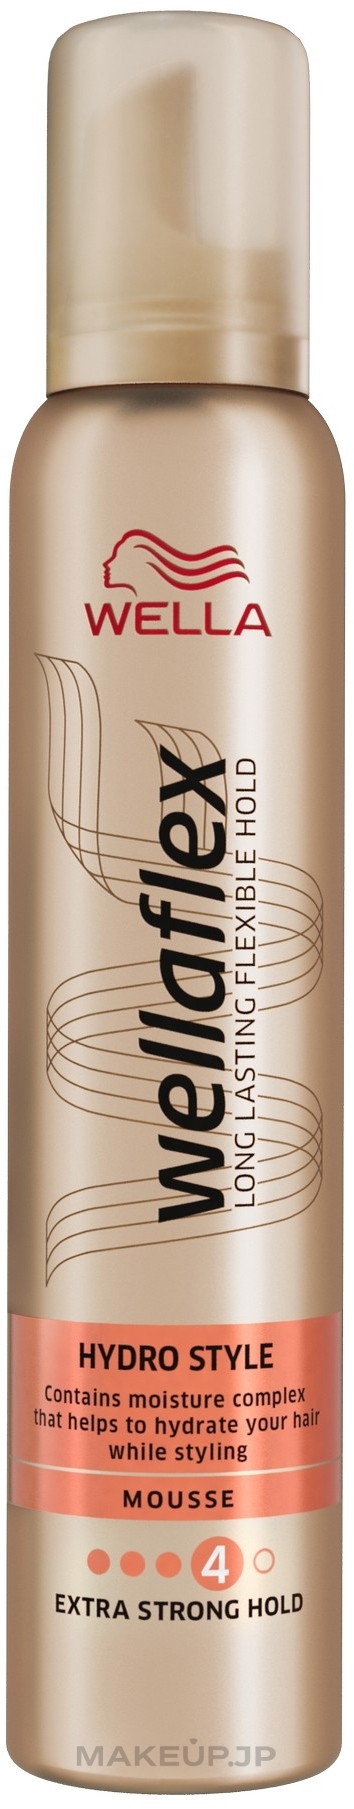 Moisturizing Complex Extra Strong Hold Hair Mousse - Wella Wellaflex HydroStyle Mousse — photo 200 ml